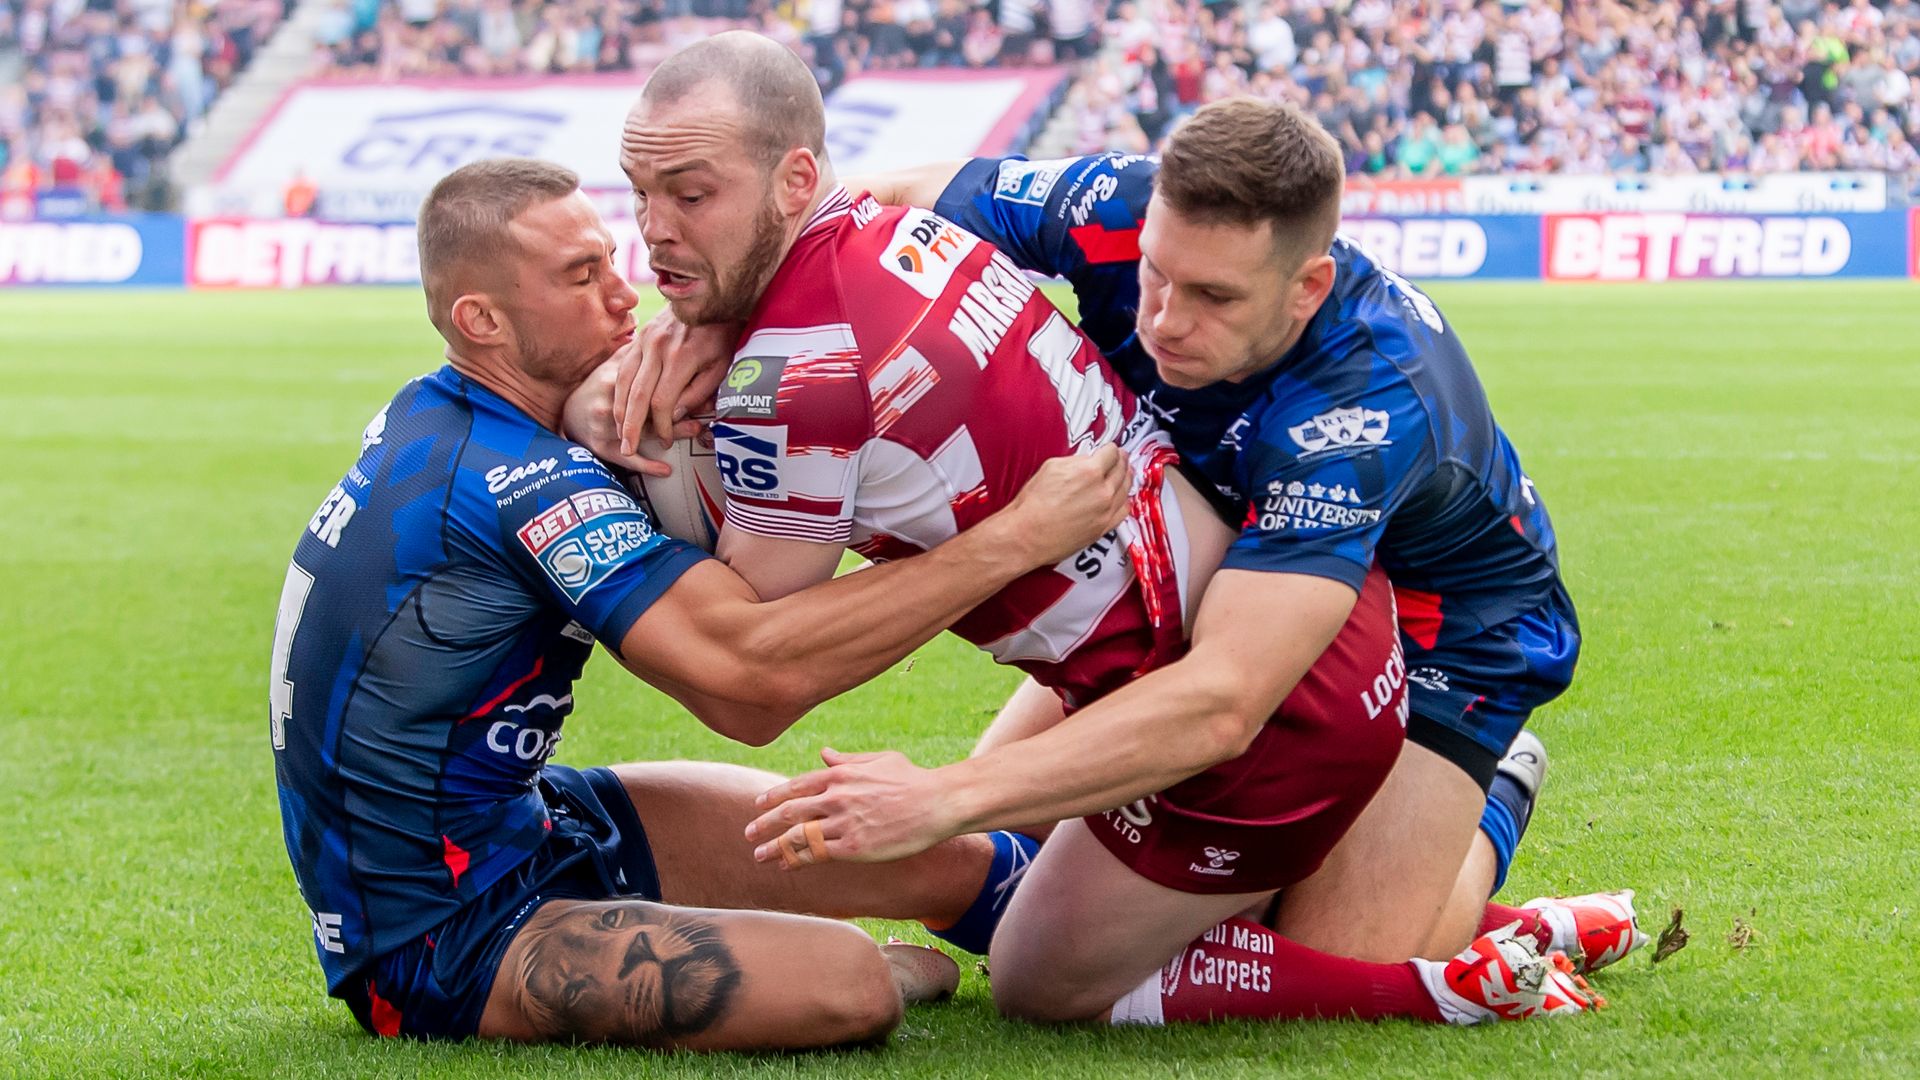 Marshall stars to help Wigan seal place in Grand Final